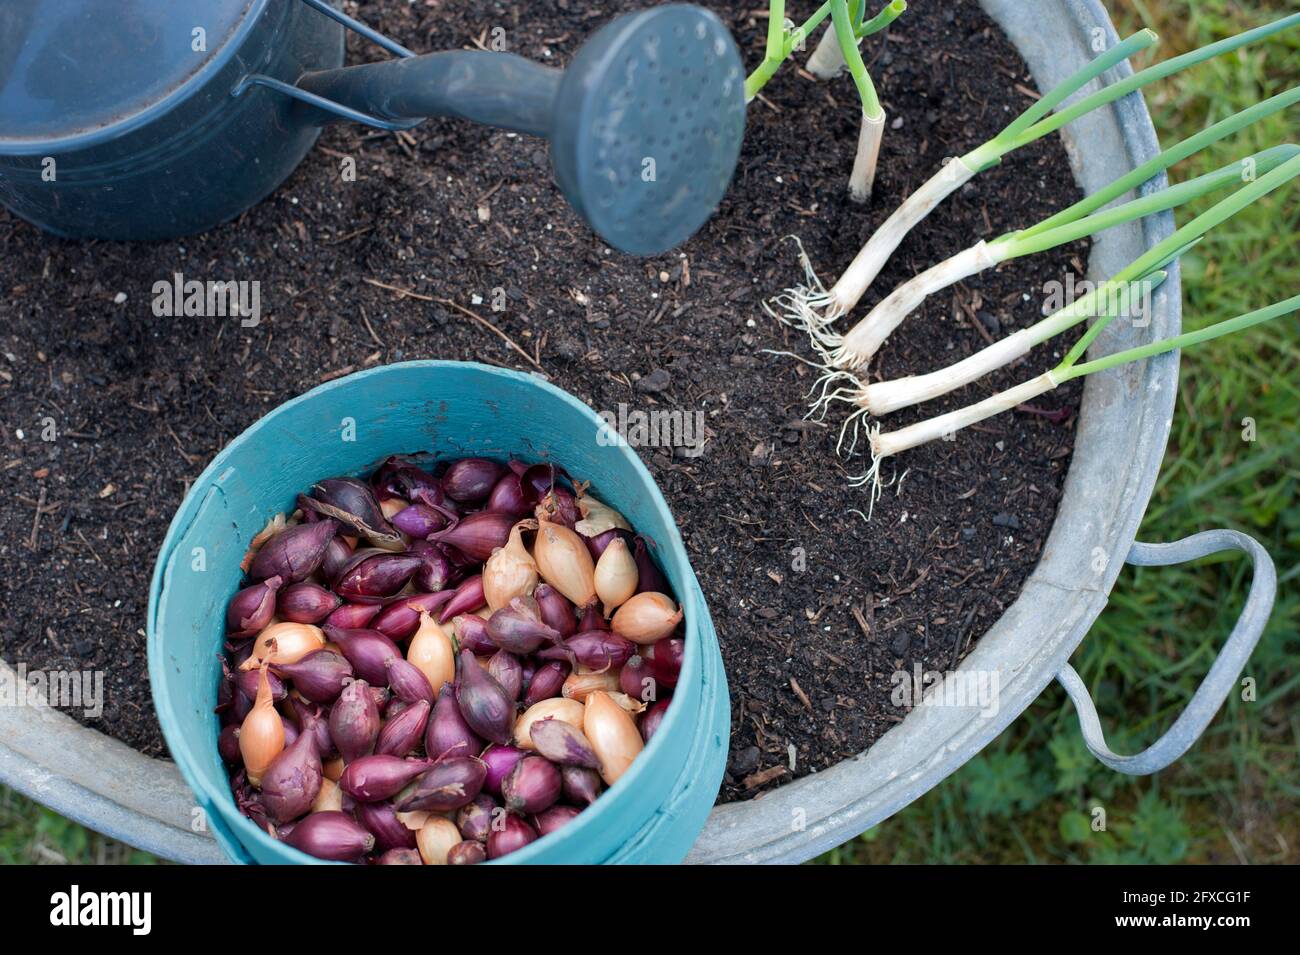 Soil in zinc tub, watering can and sieve with fresh onions Stock Photo